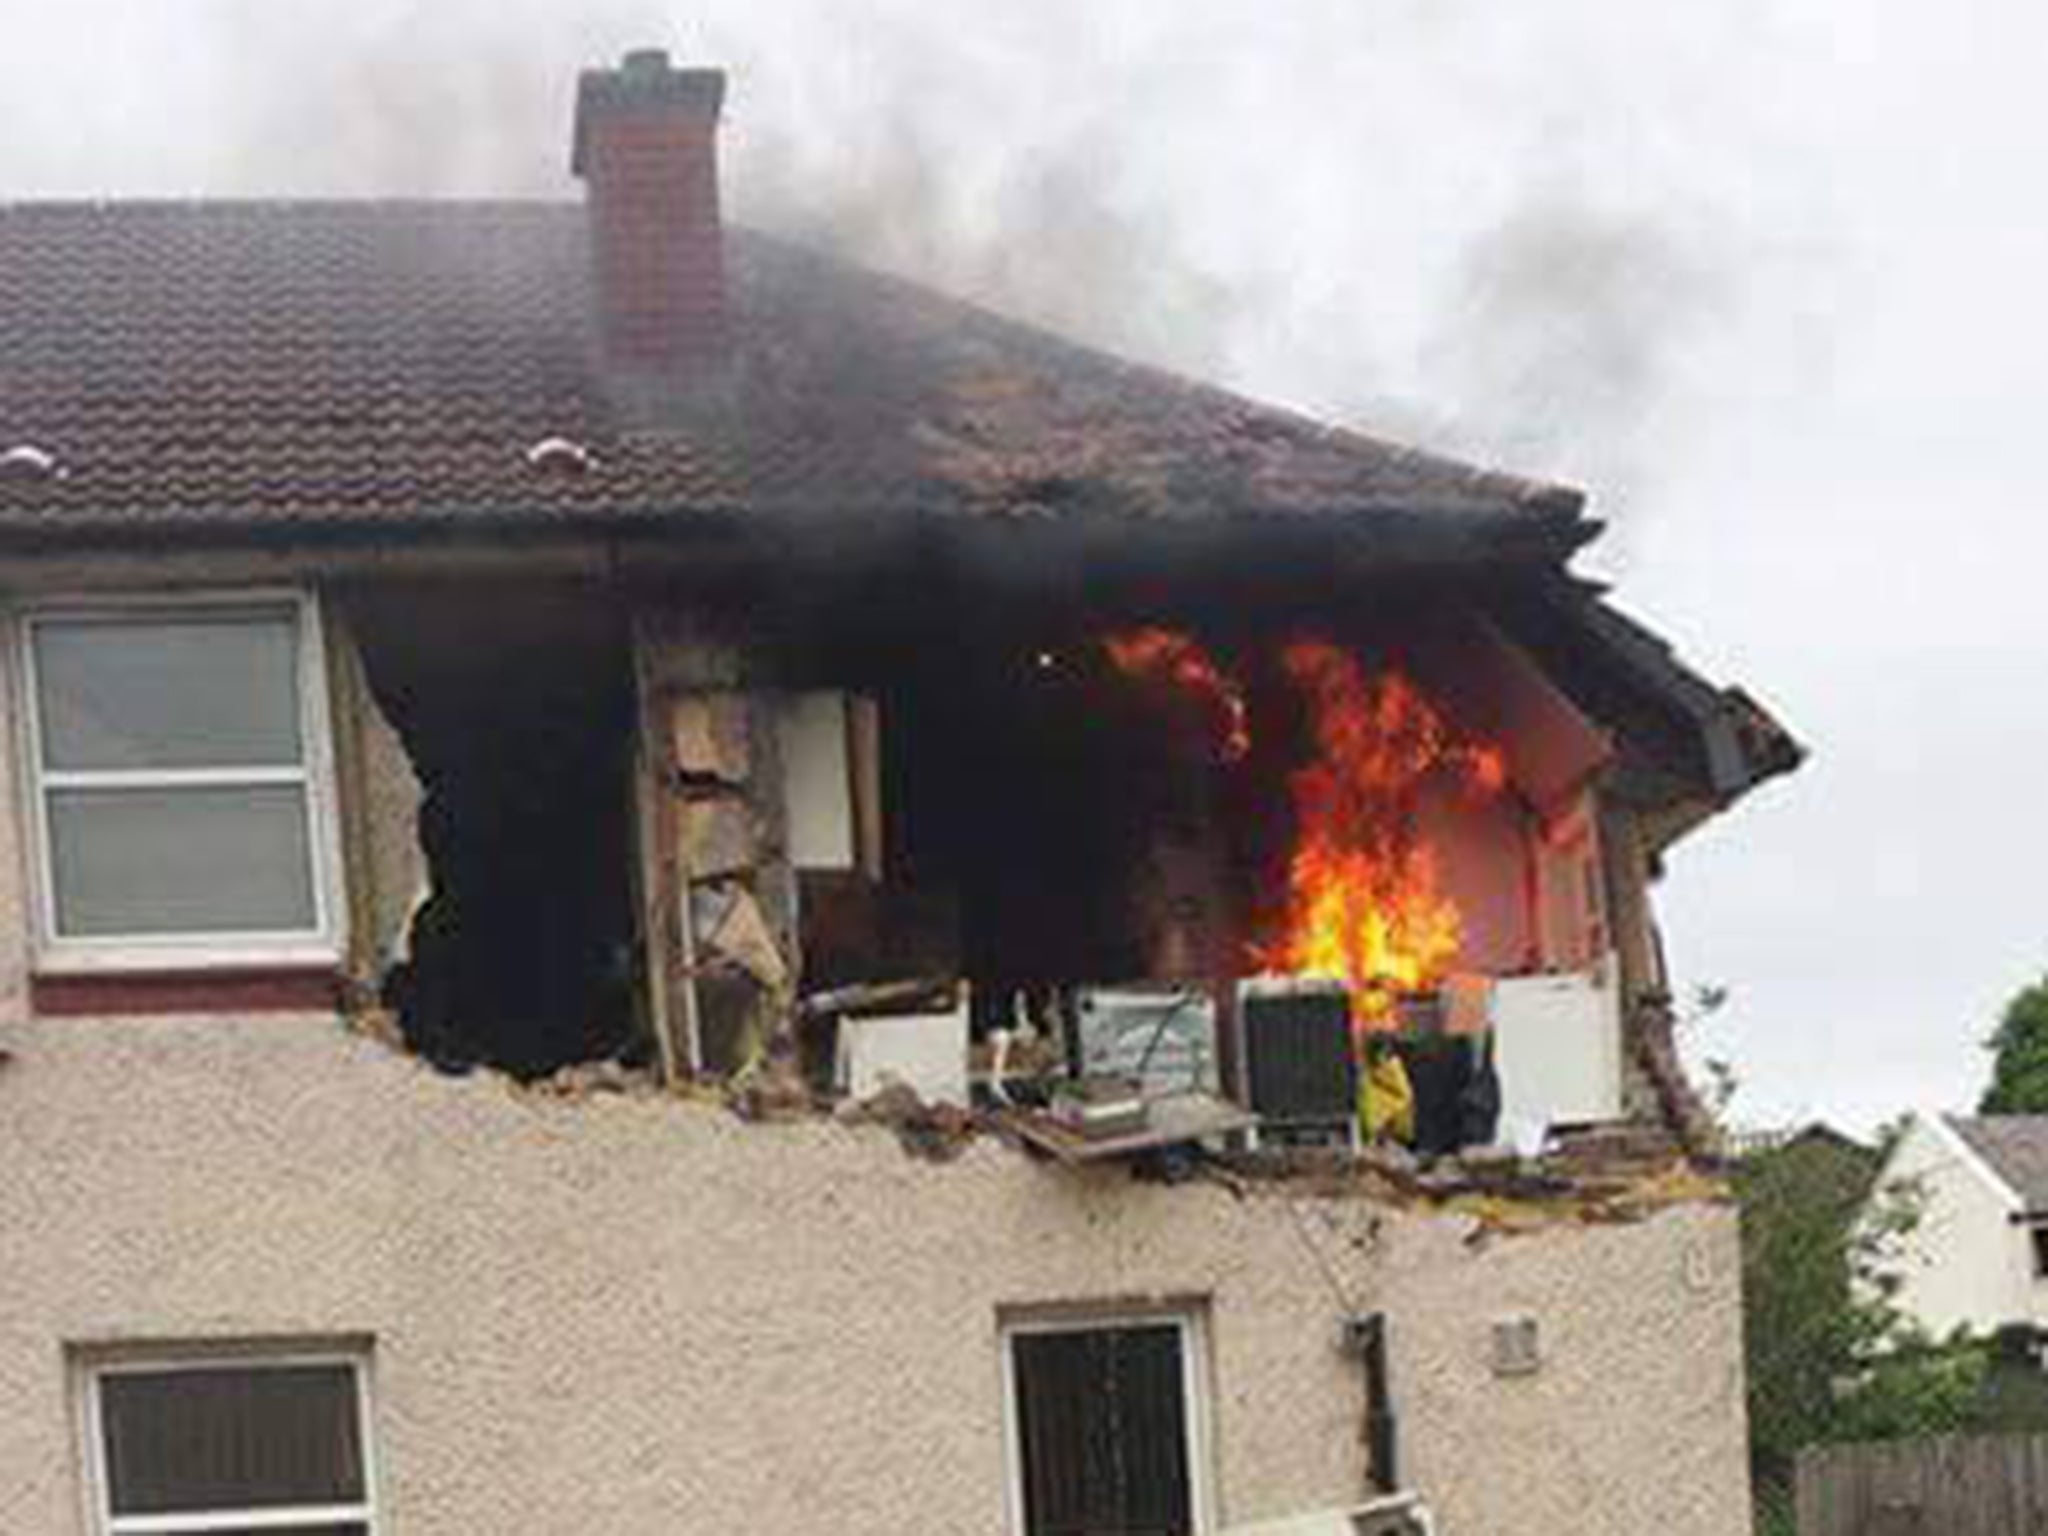 Images posted on social media showed the outer walls and roof of the first-floor flat largely destroyed